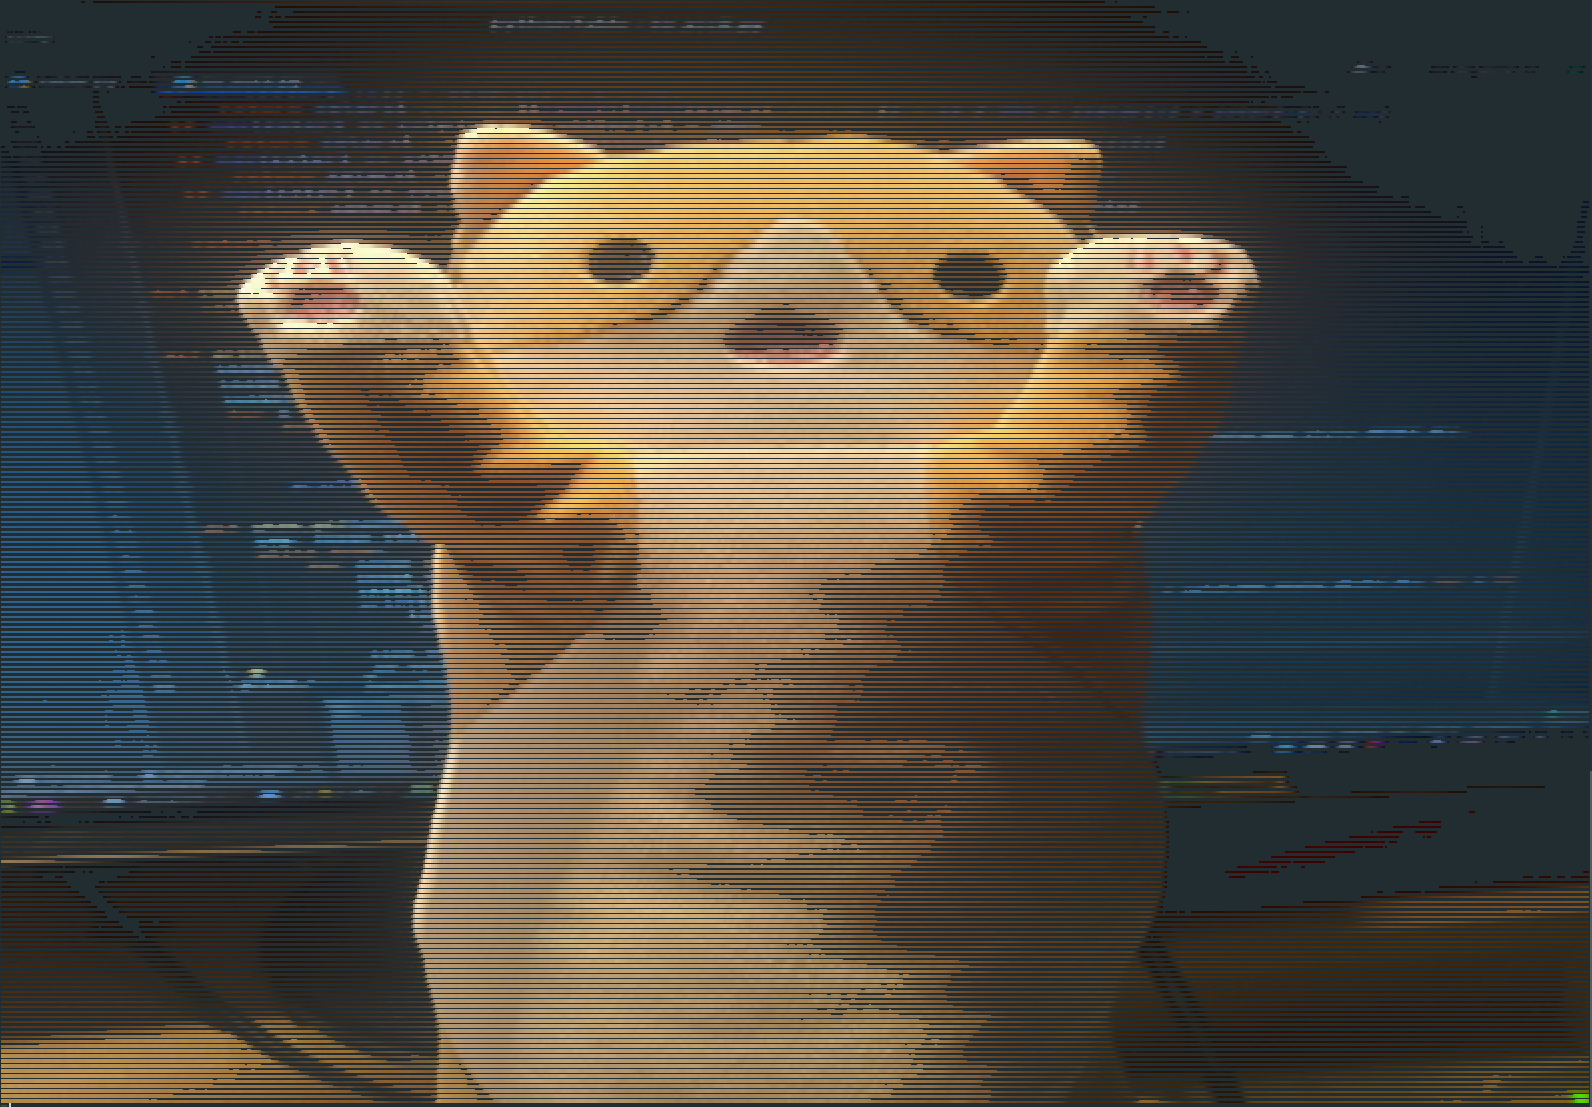 my plush toy on the background of the monitor, the image in the console